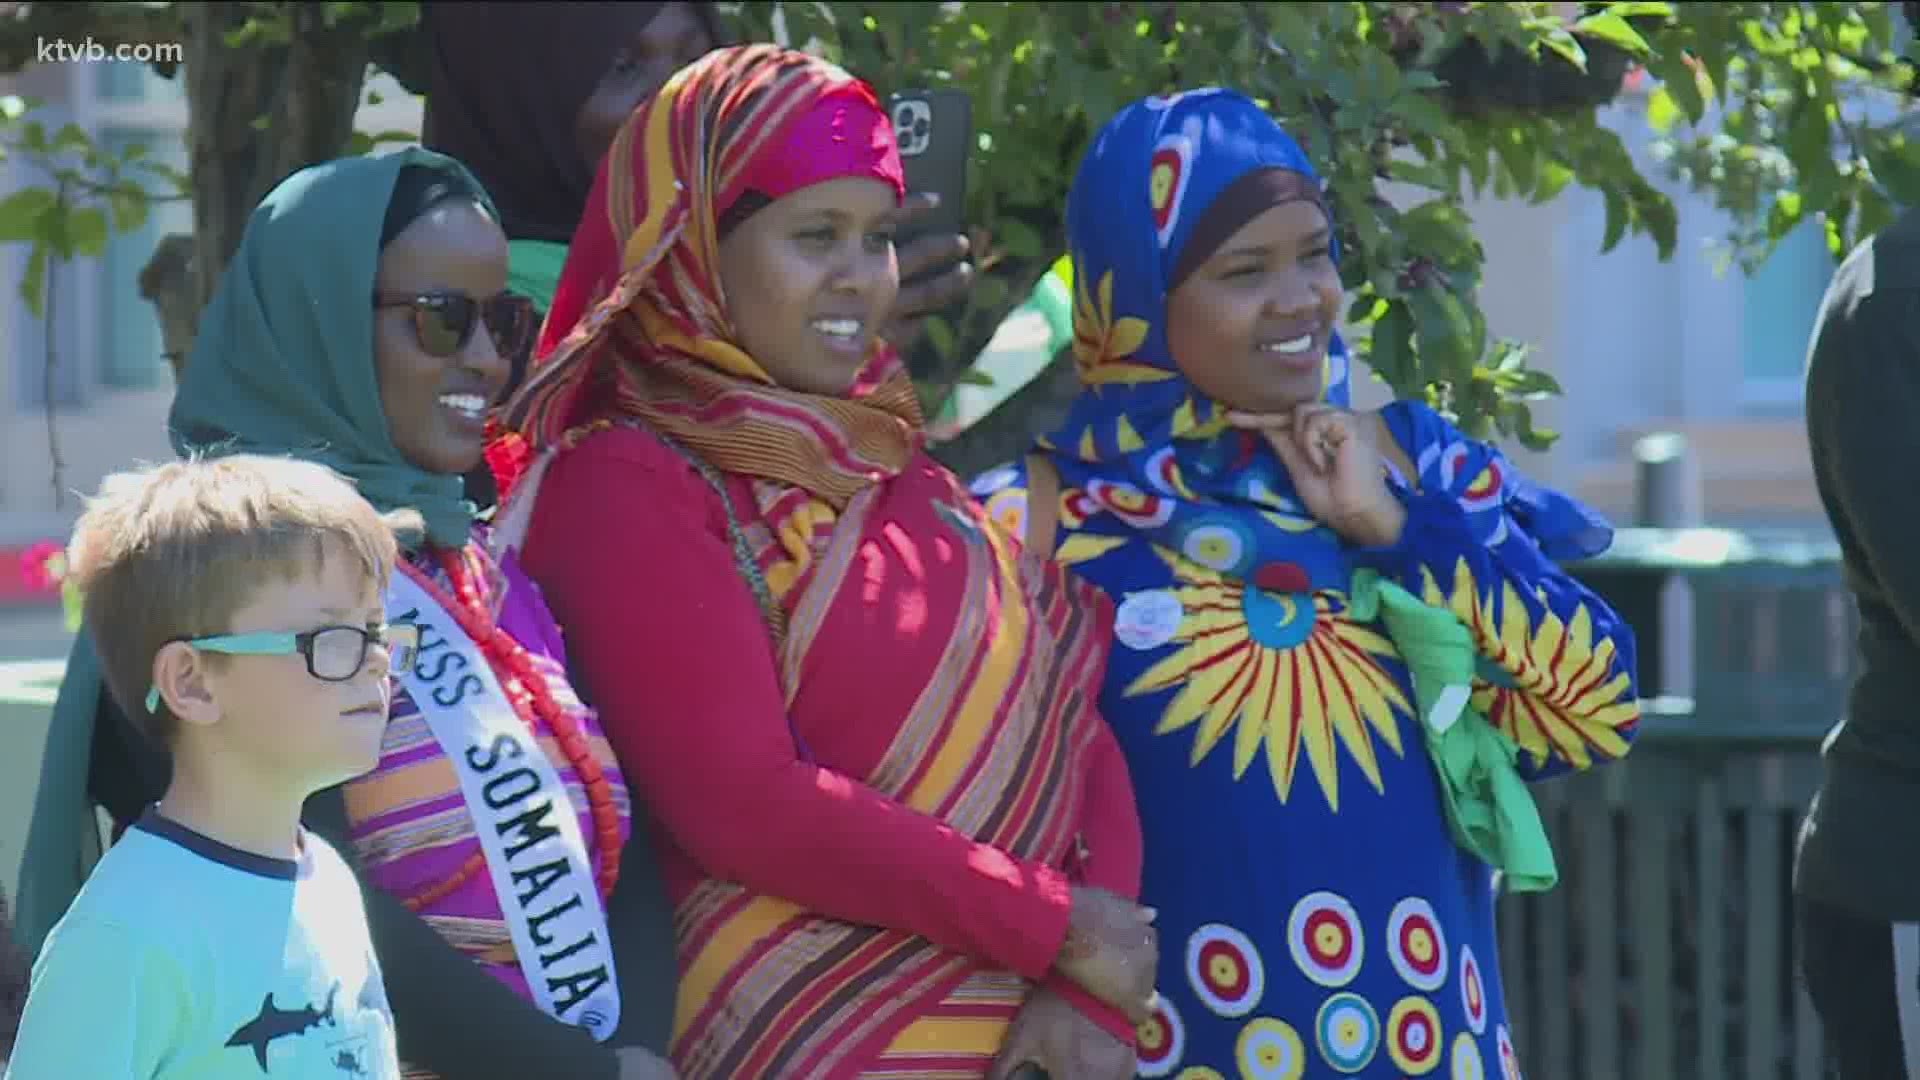 While World Refugee Day has come and gone, celebrations were happening across the Treasure Valley on Saturday.